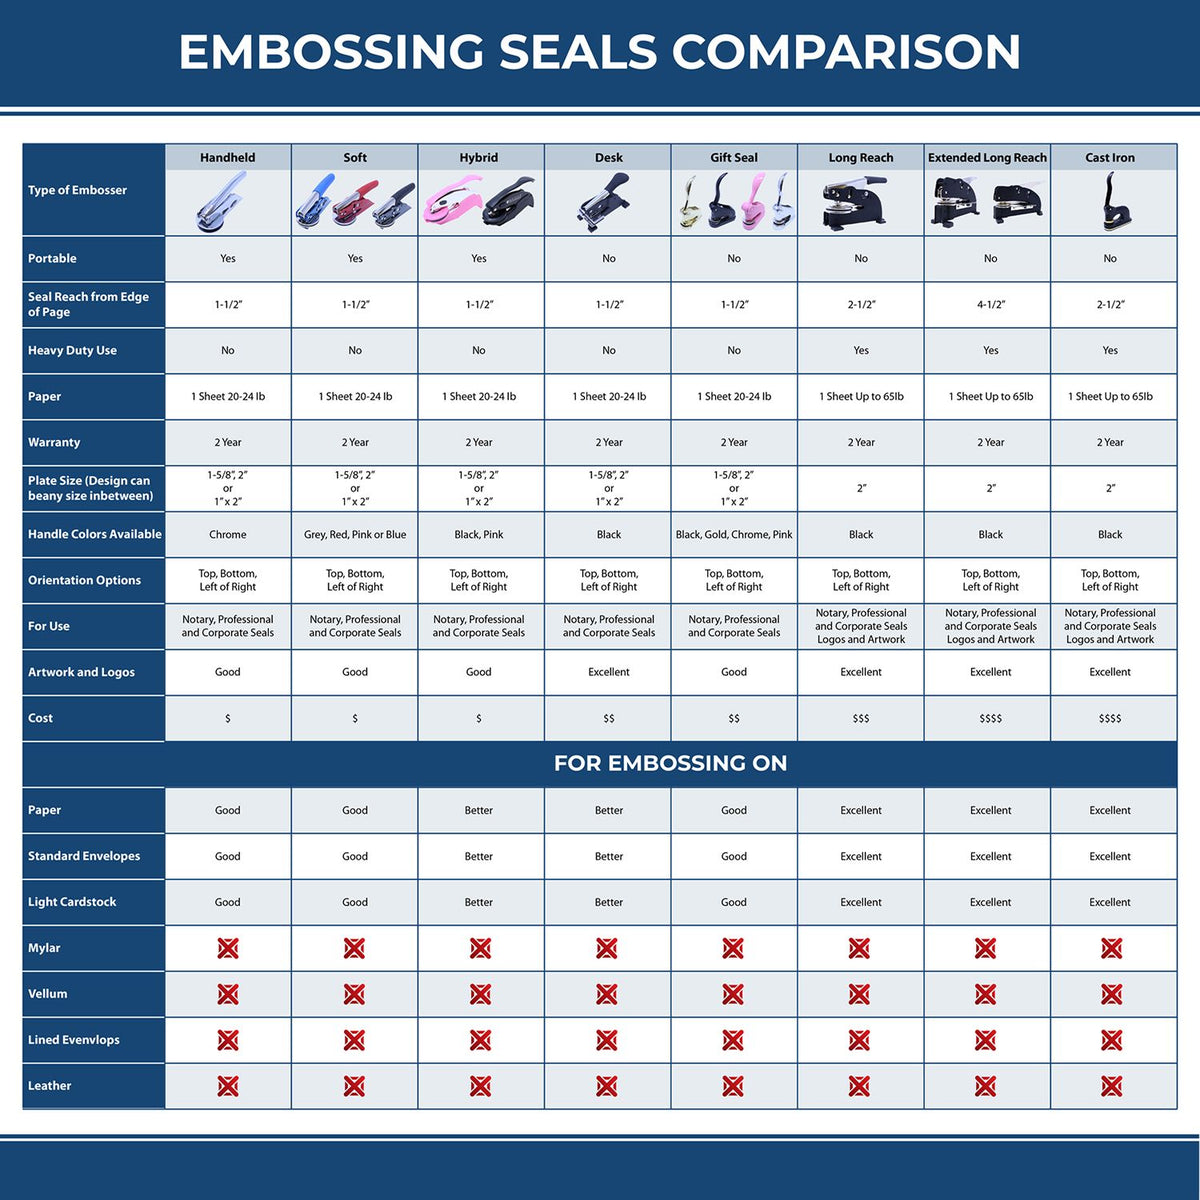 A comparison chart for the different types of mount models available for the Soft Georgia Professional Engineer Seal.